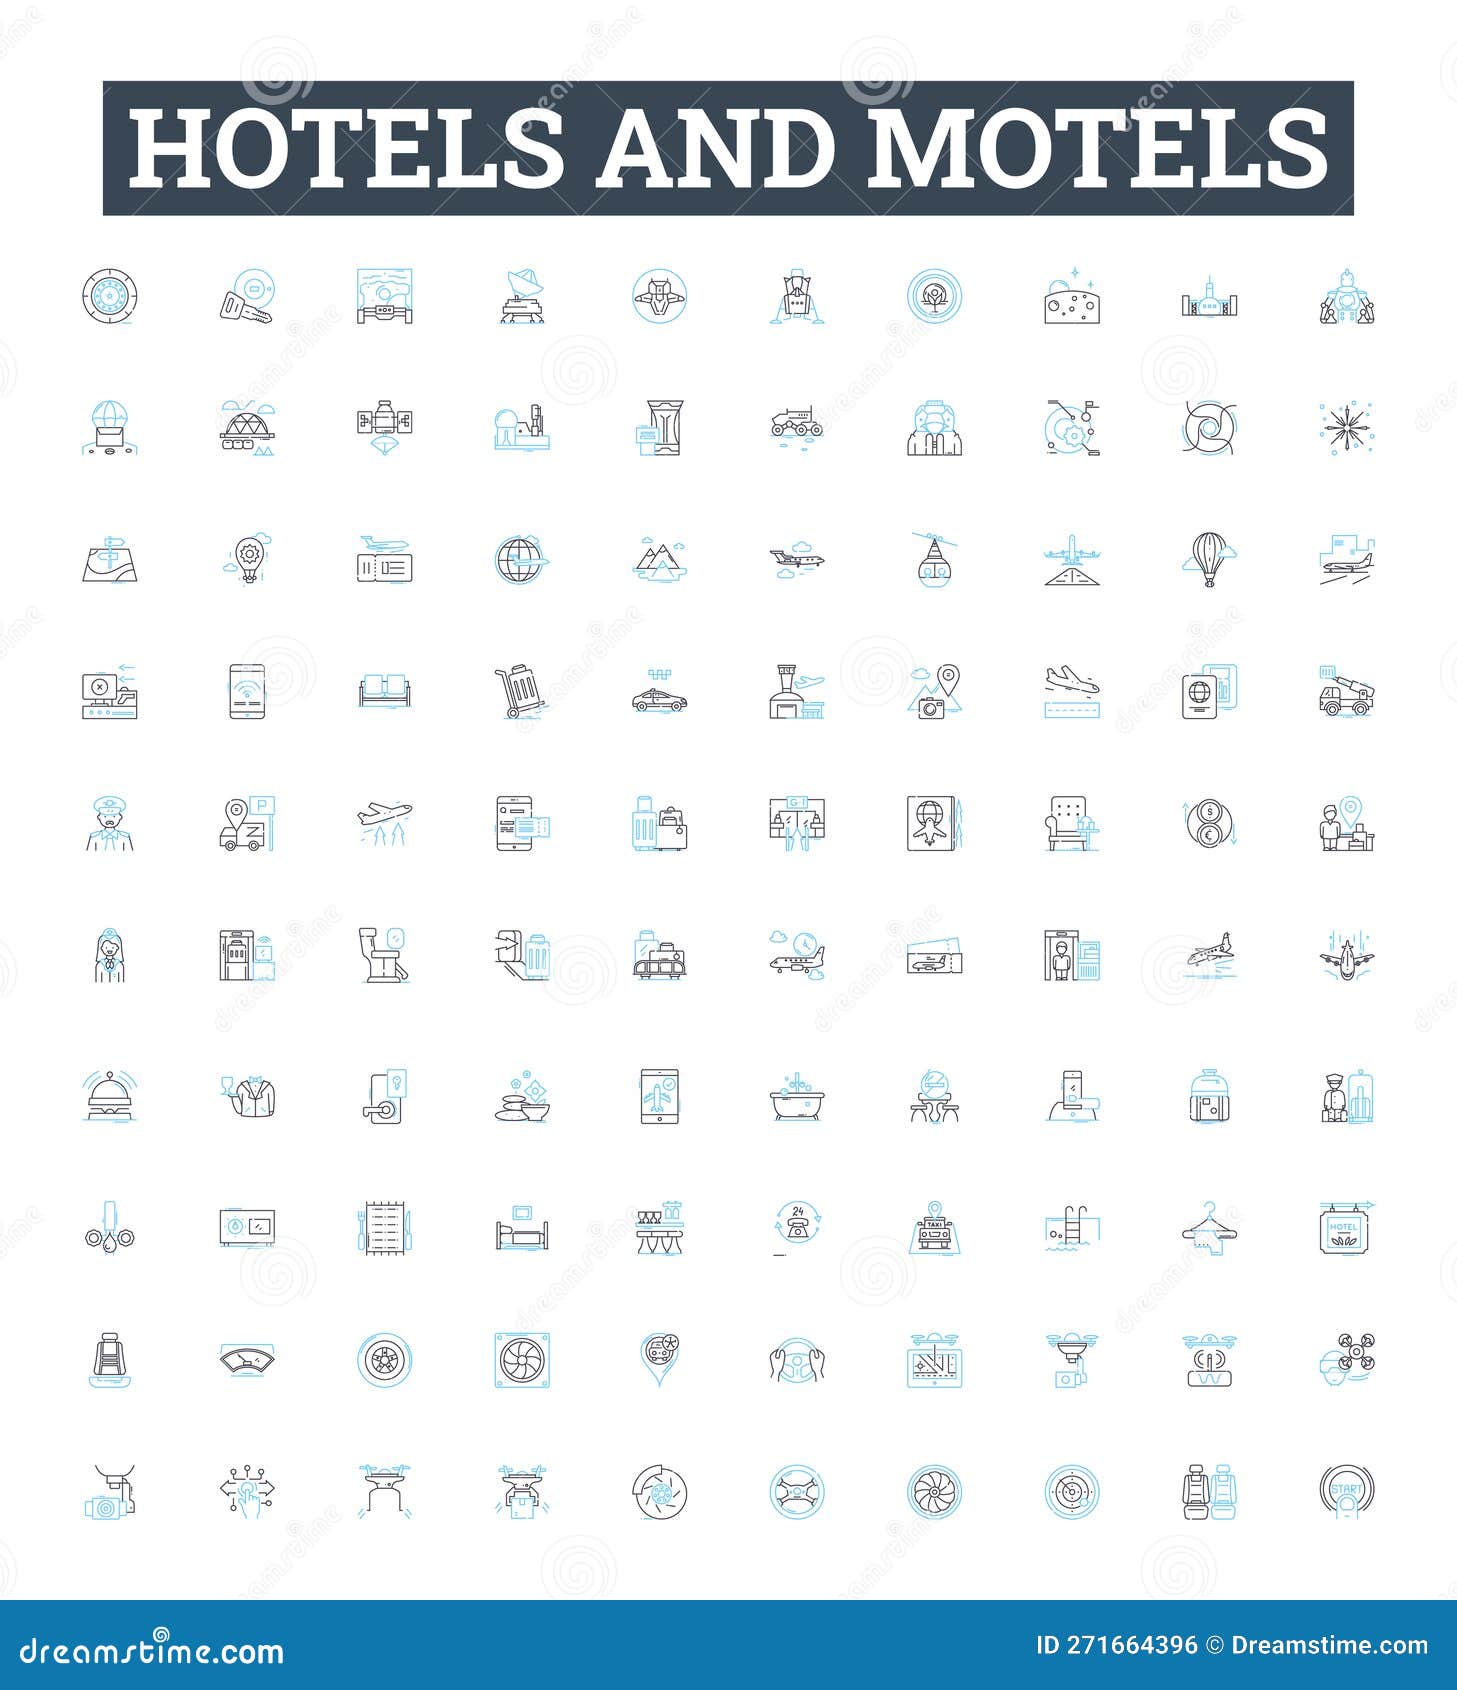 hotels and motels  line icons set. lodgings, accommodations, inns, resorts, suites, motels, hostels 